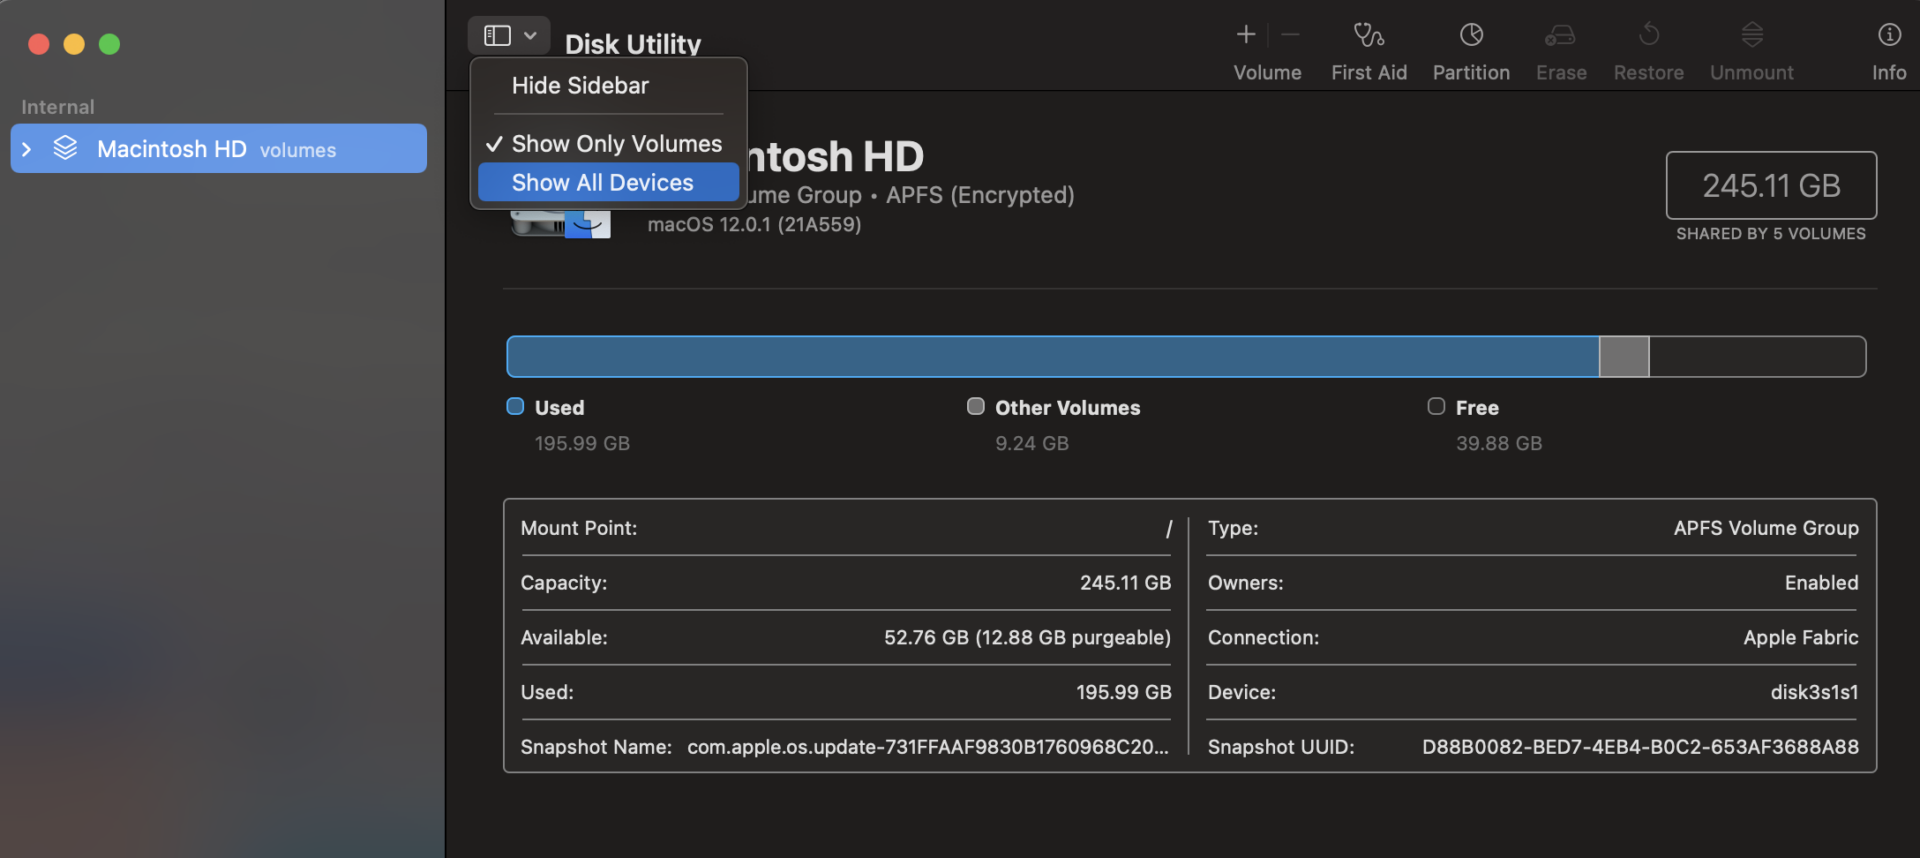 Changing the 'View' type of 'Disk Utility' to 'Show All Devices'